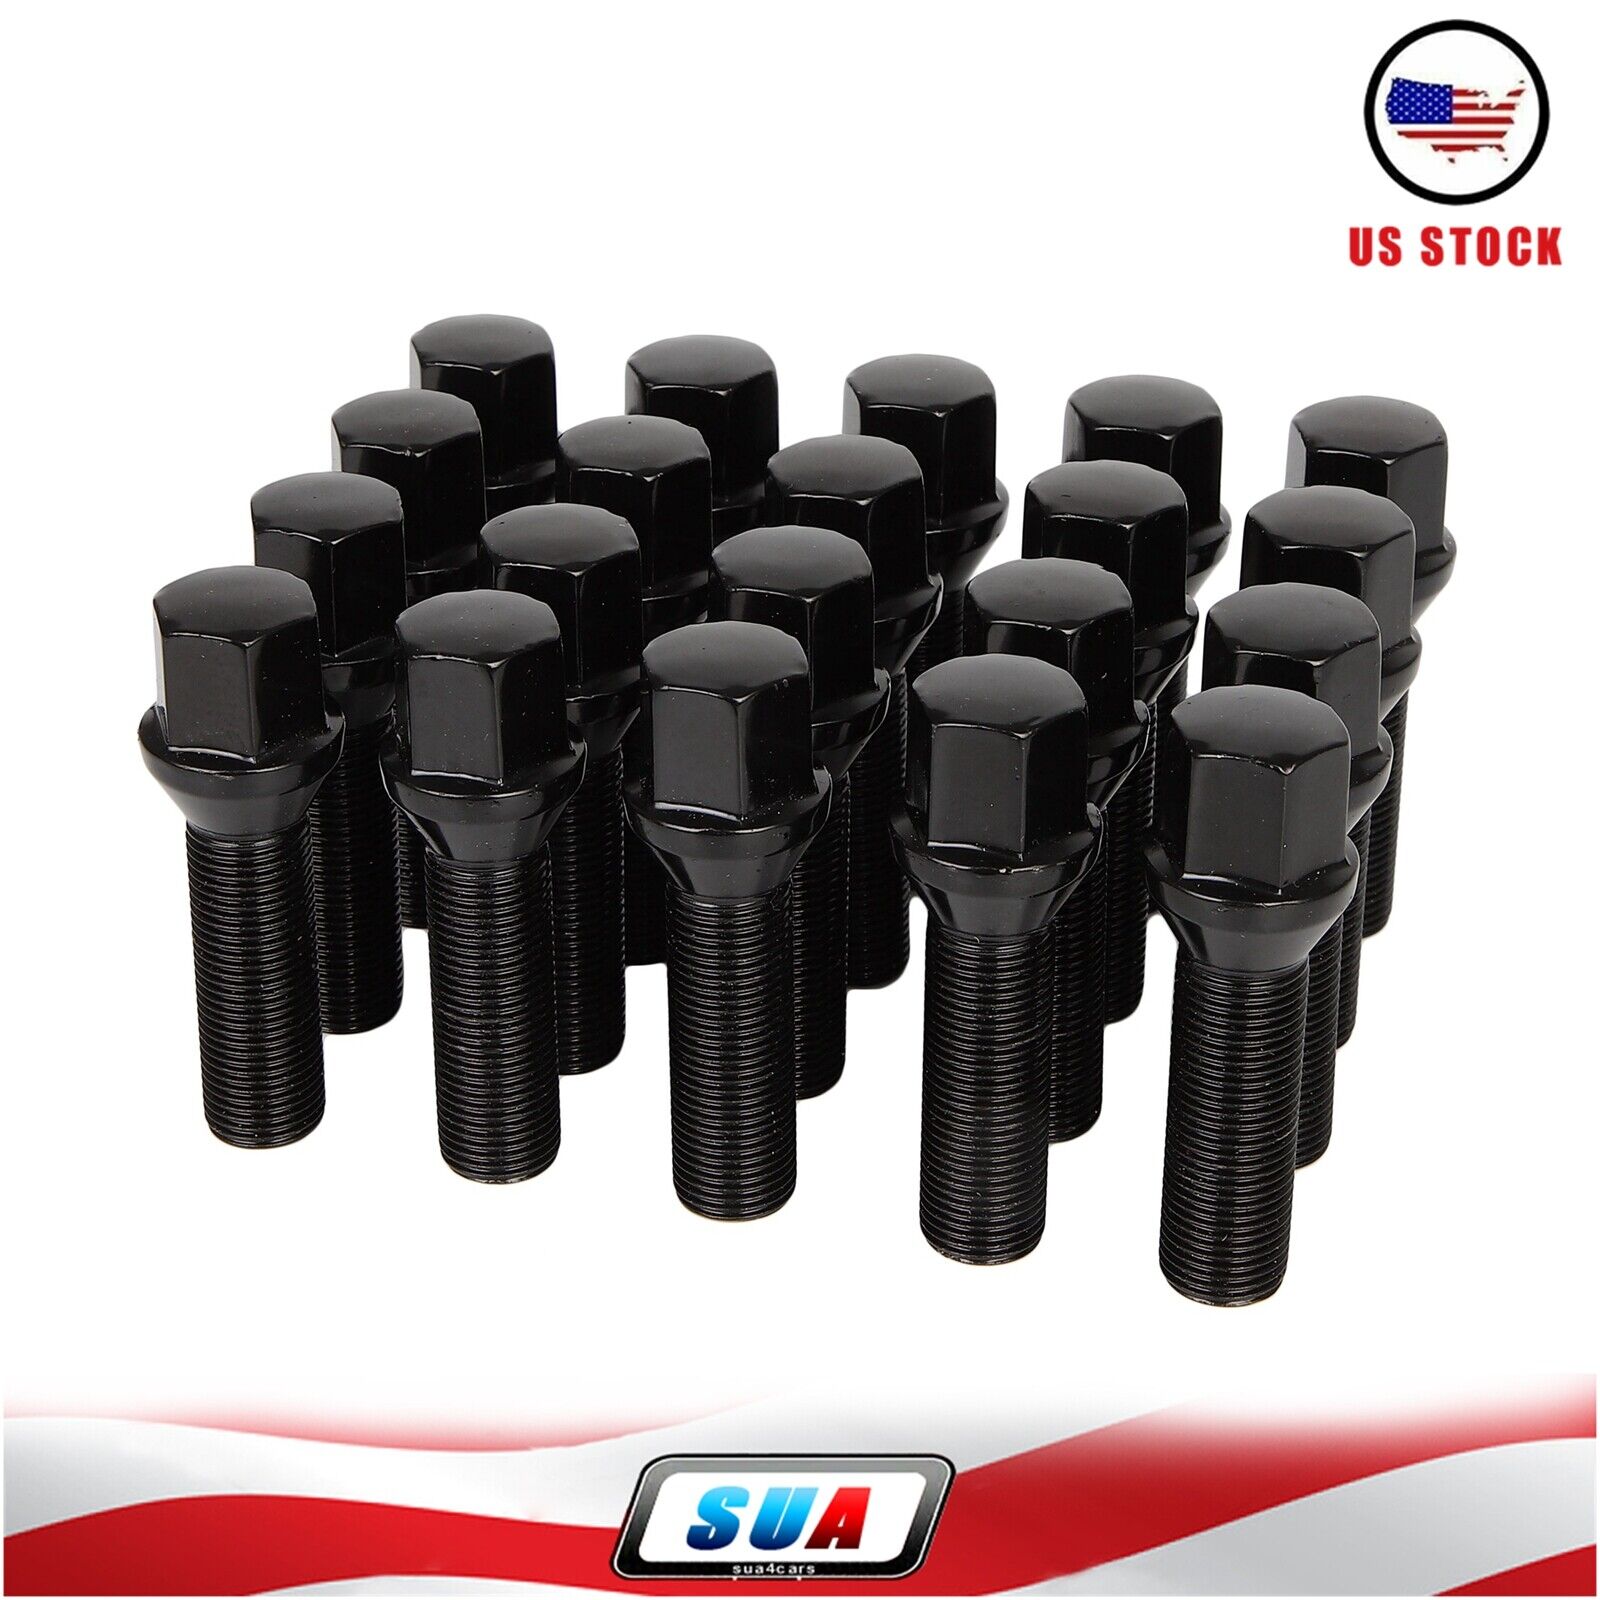 Set 20 14x1.25 Black Lug Bolts Nuts Cone Seat Extended 40mm Shank For BMW Mini